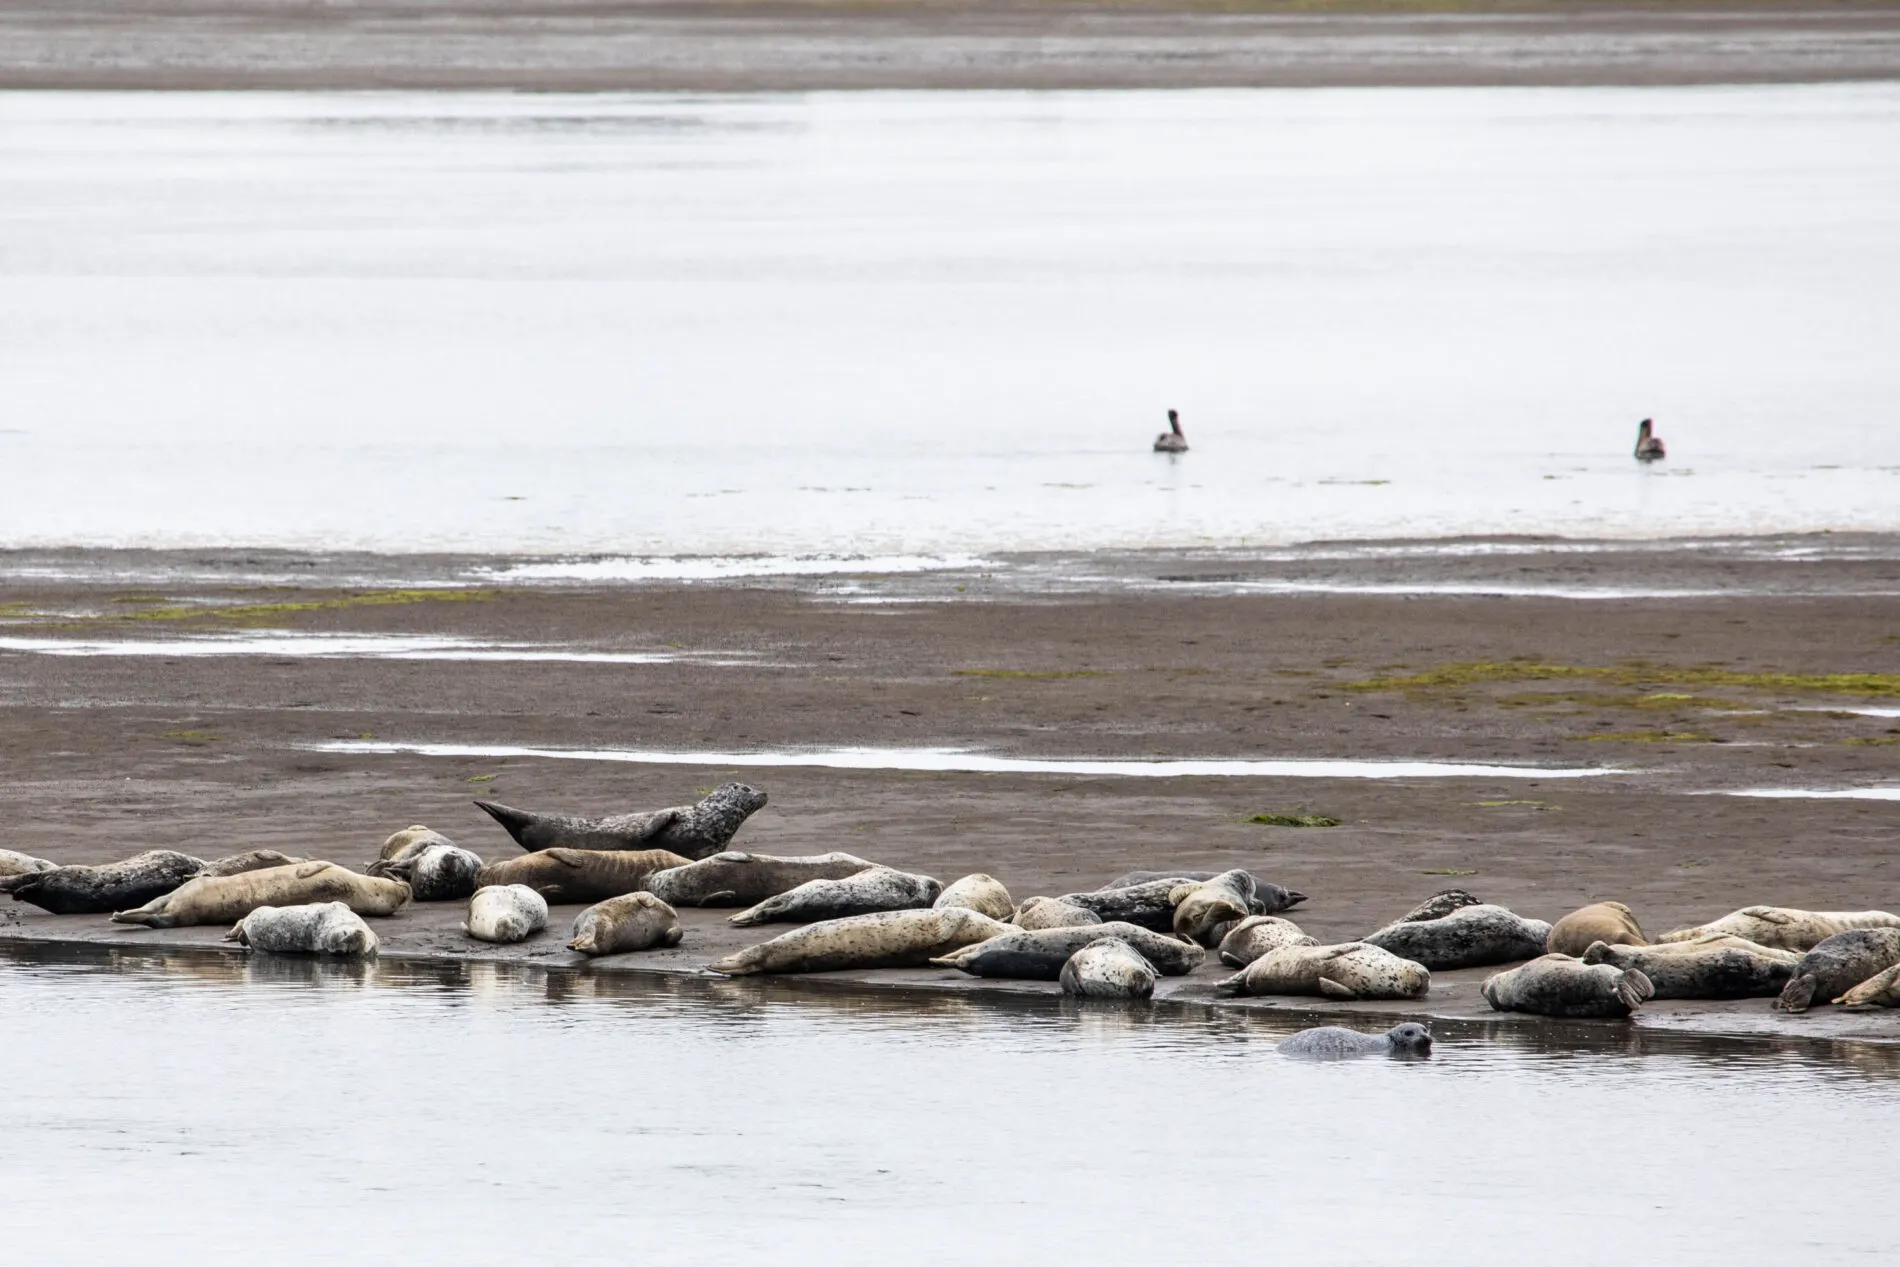 Seals lounging at Golden Gate National Recreation Area is a great place to see wildlife along the PCH.